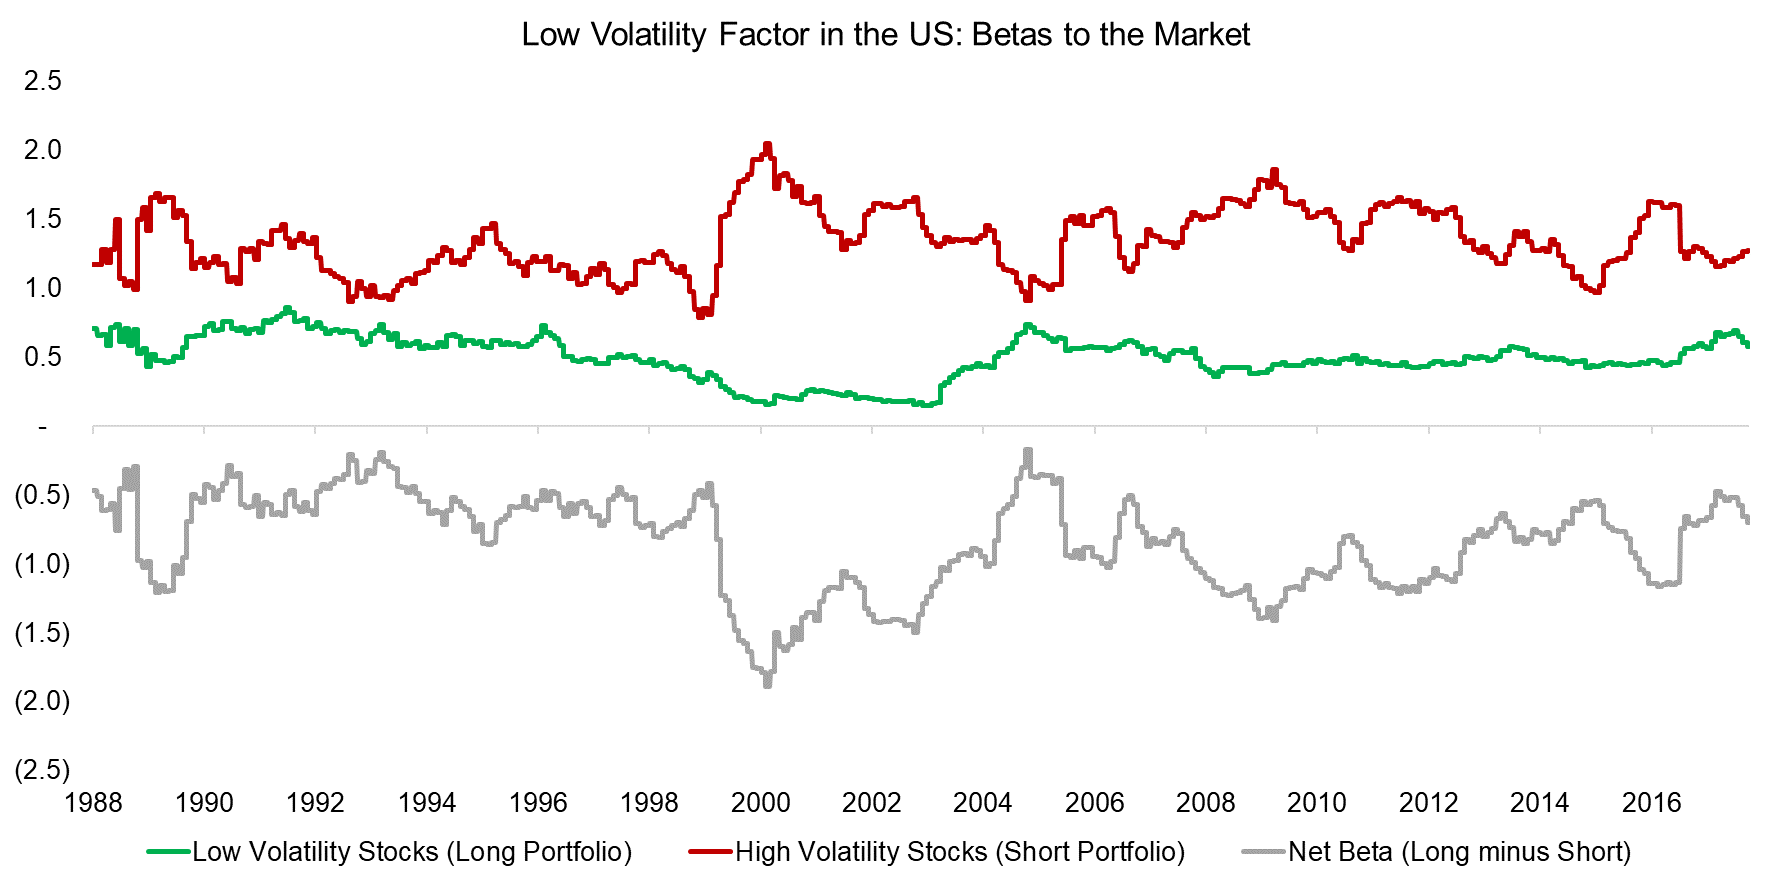 Low Volatility Factor in the US Betas to the Market